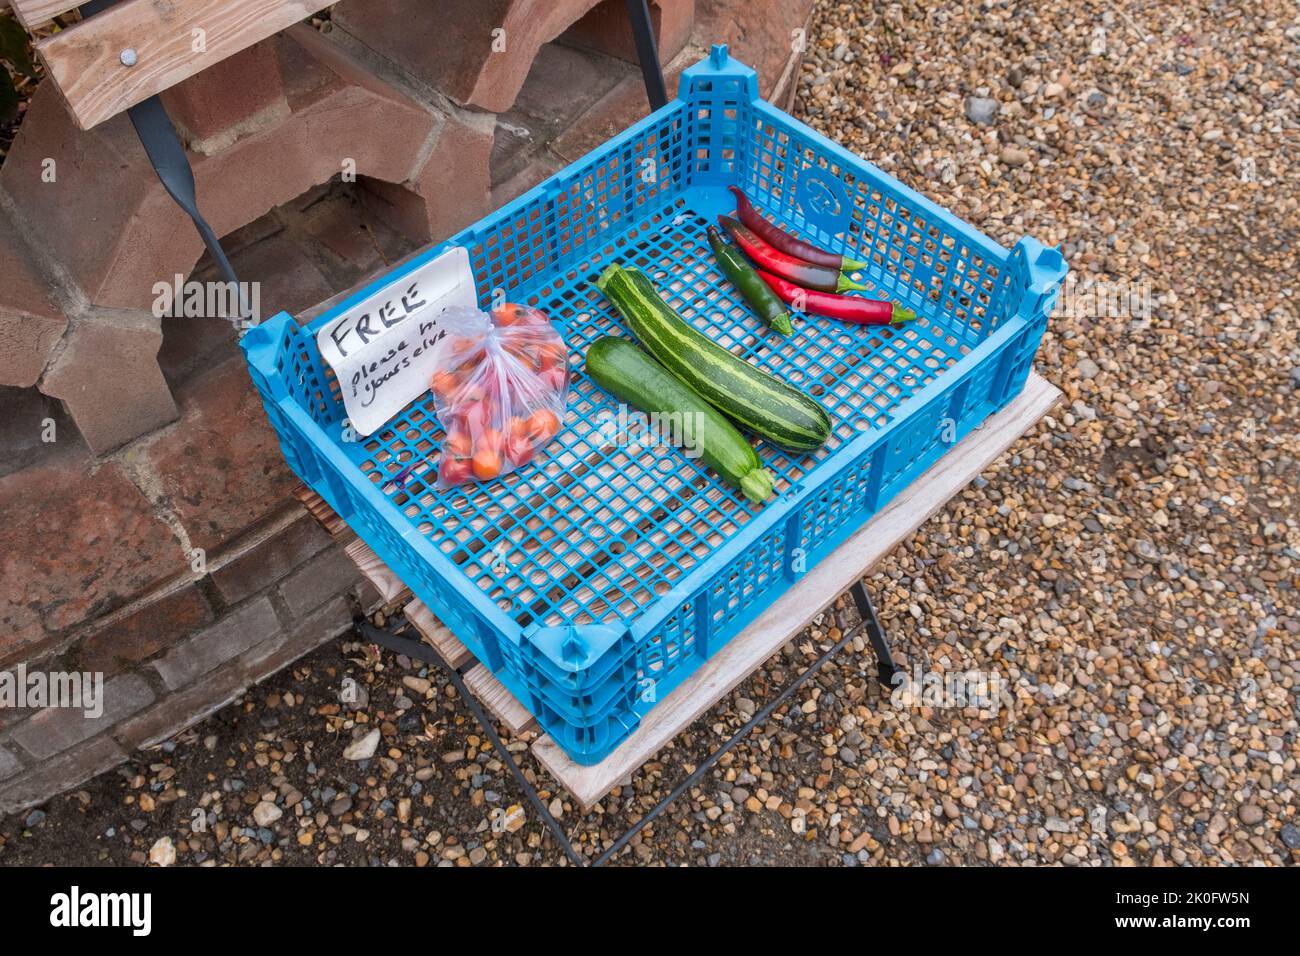 'Free, please help yourself' fruit and vegetables. Suffolk, UK Stock Photo